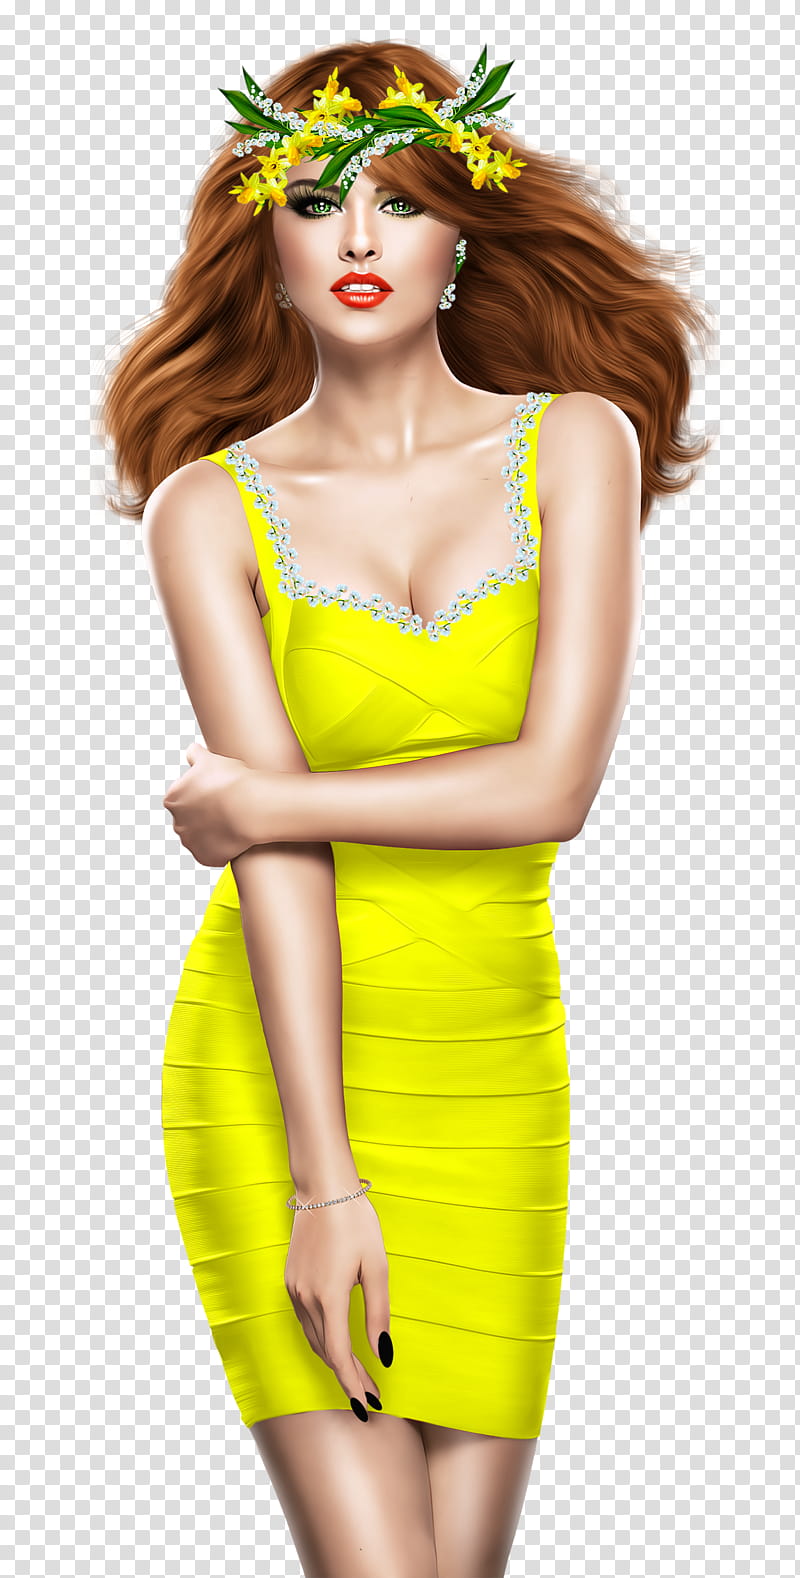 Hair Style, Dolled Up, 2019, Kbk, Model, Fashion, Shoot, Clothing transparent background PNG clipart